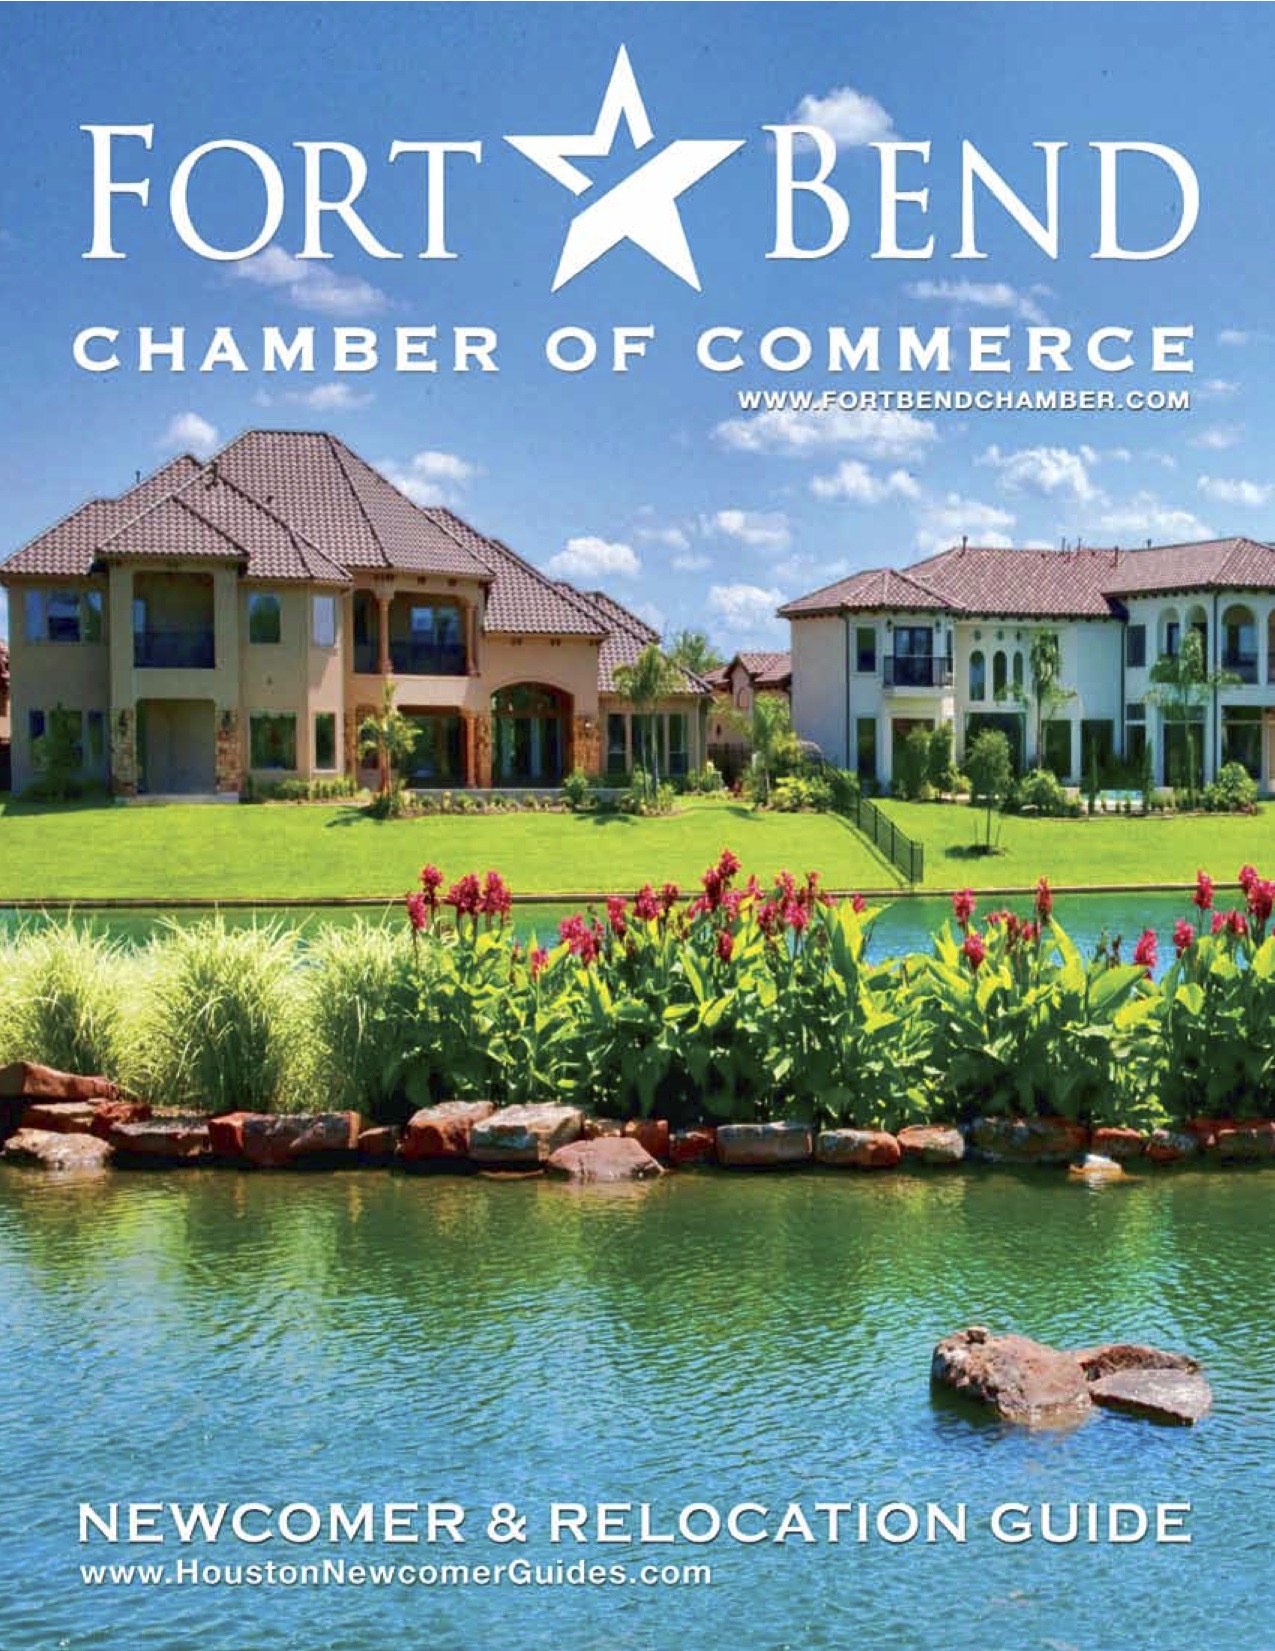 Fort Bend Chamber cover